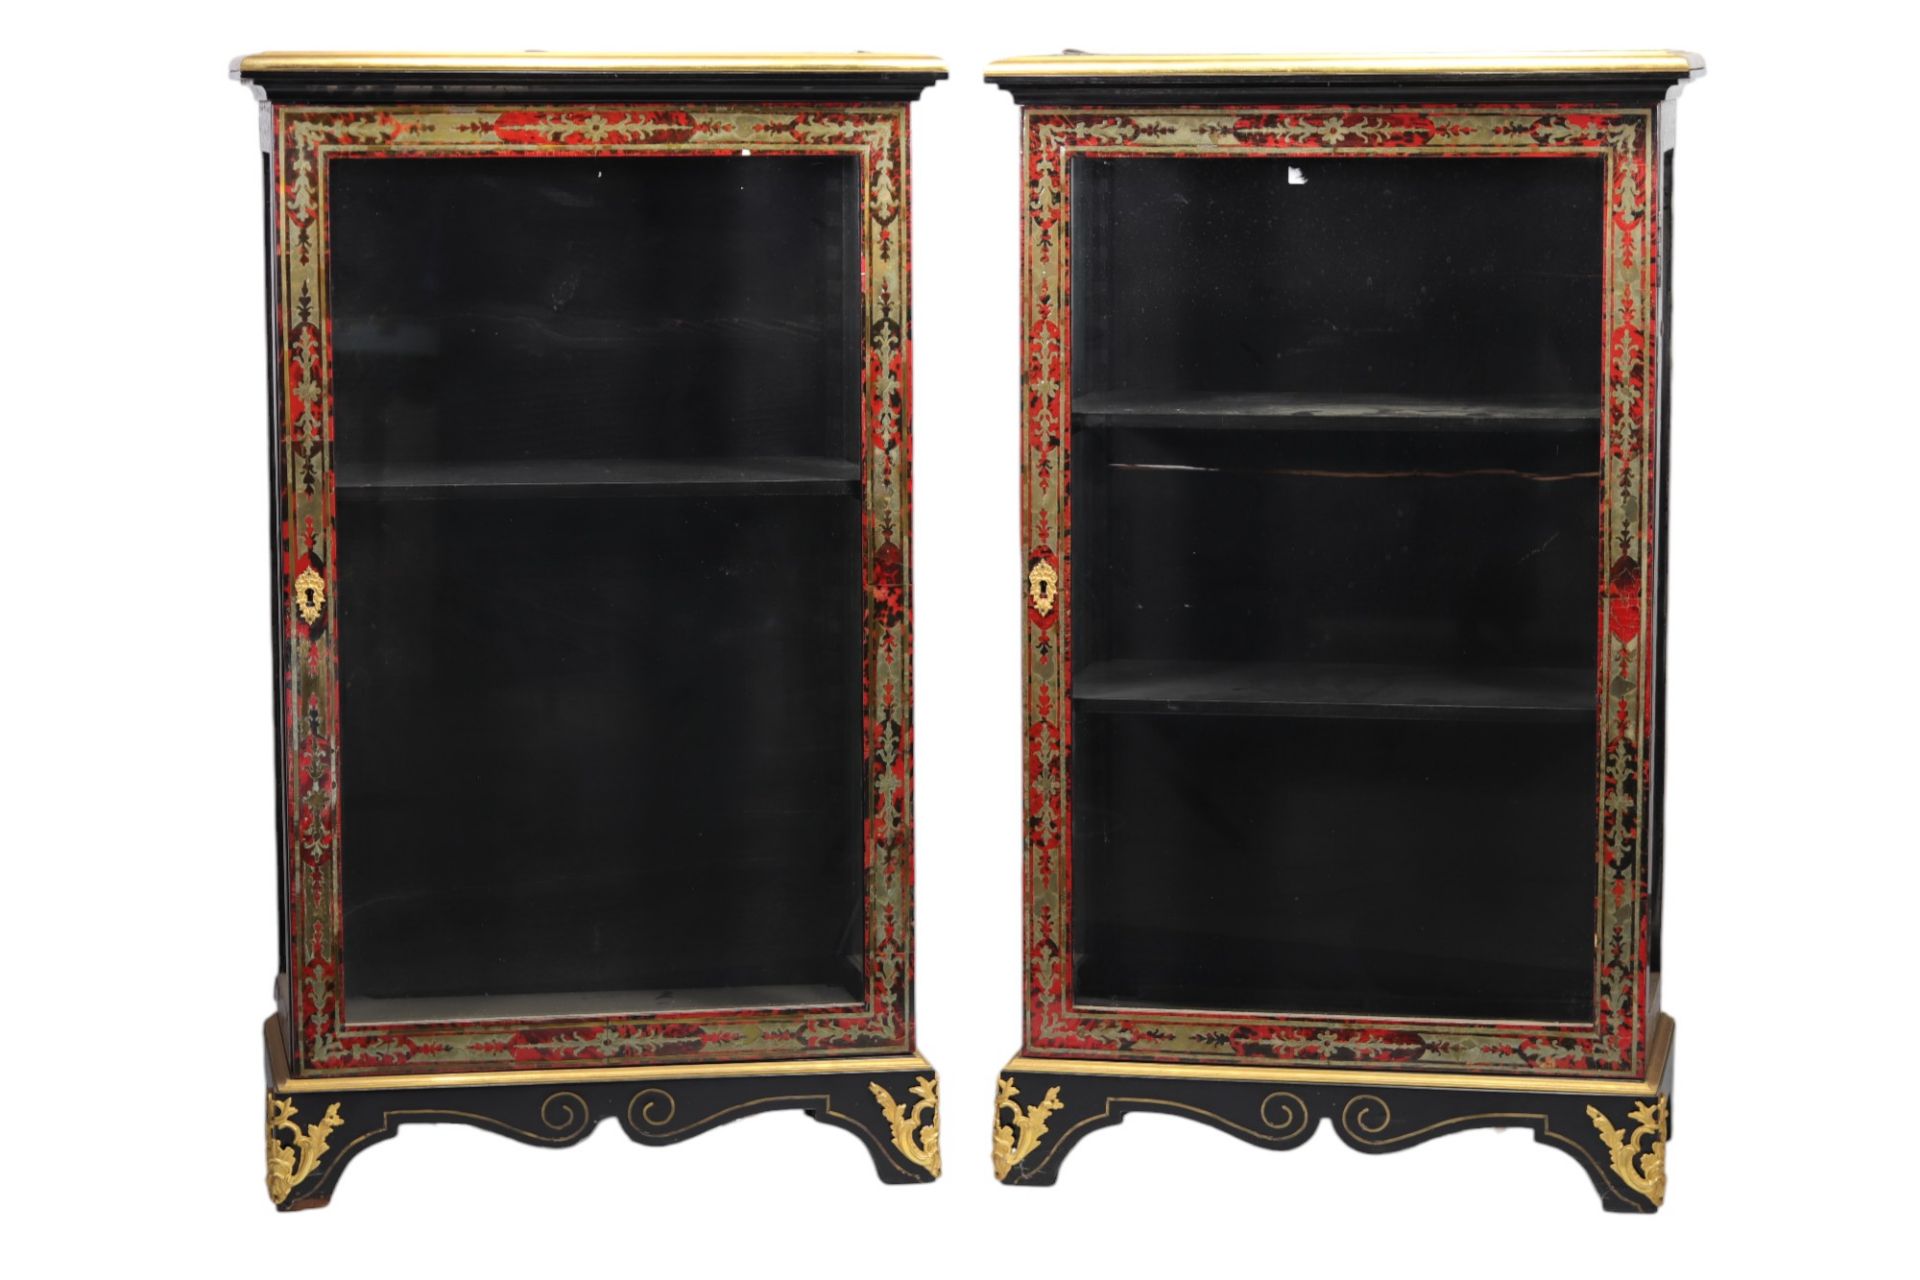 Pair of Boulle marquetry display cabinets in tortoise shell and brass from Napoleon III period